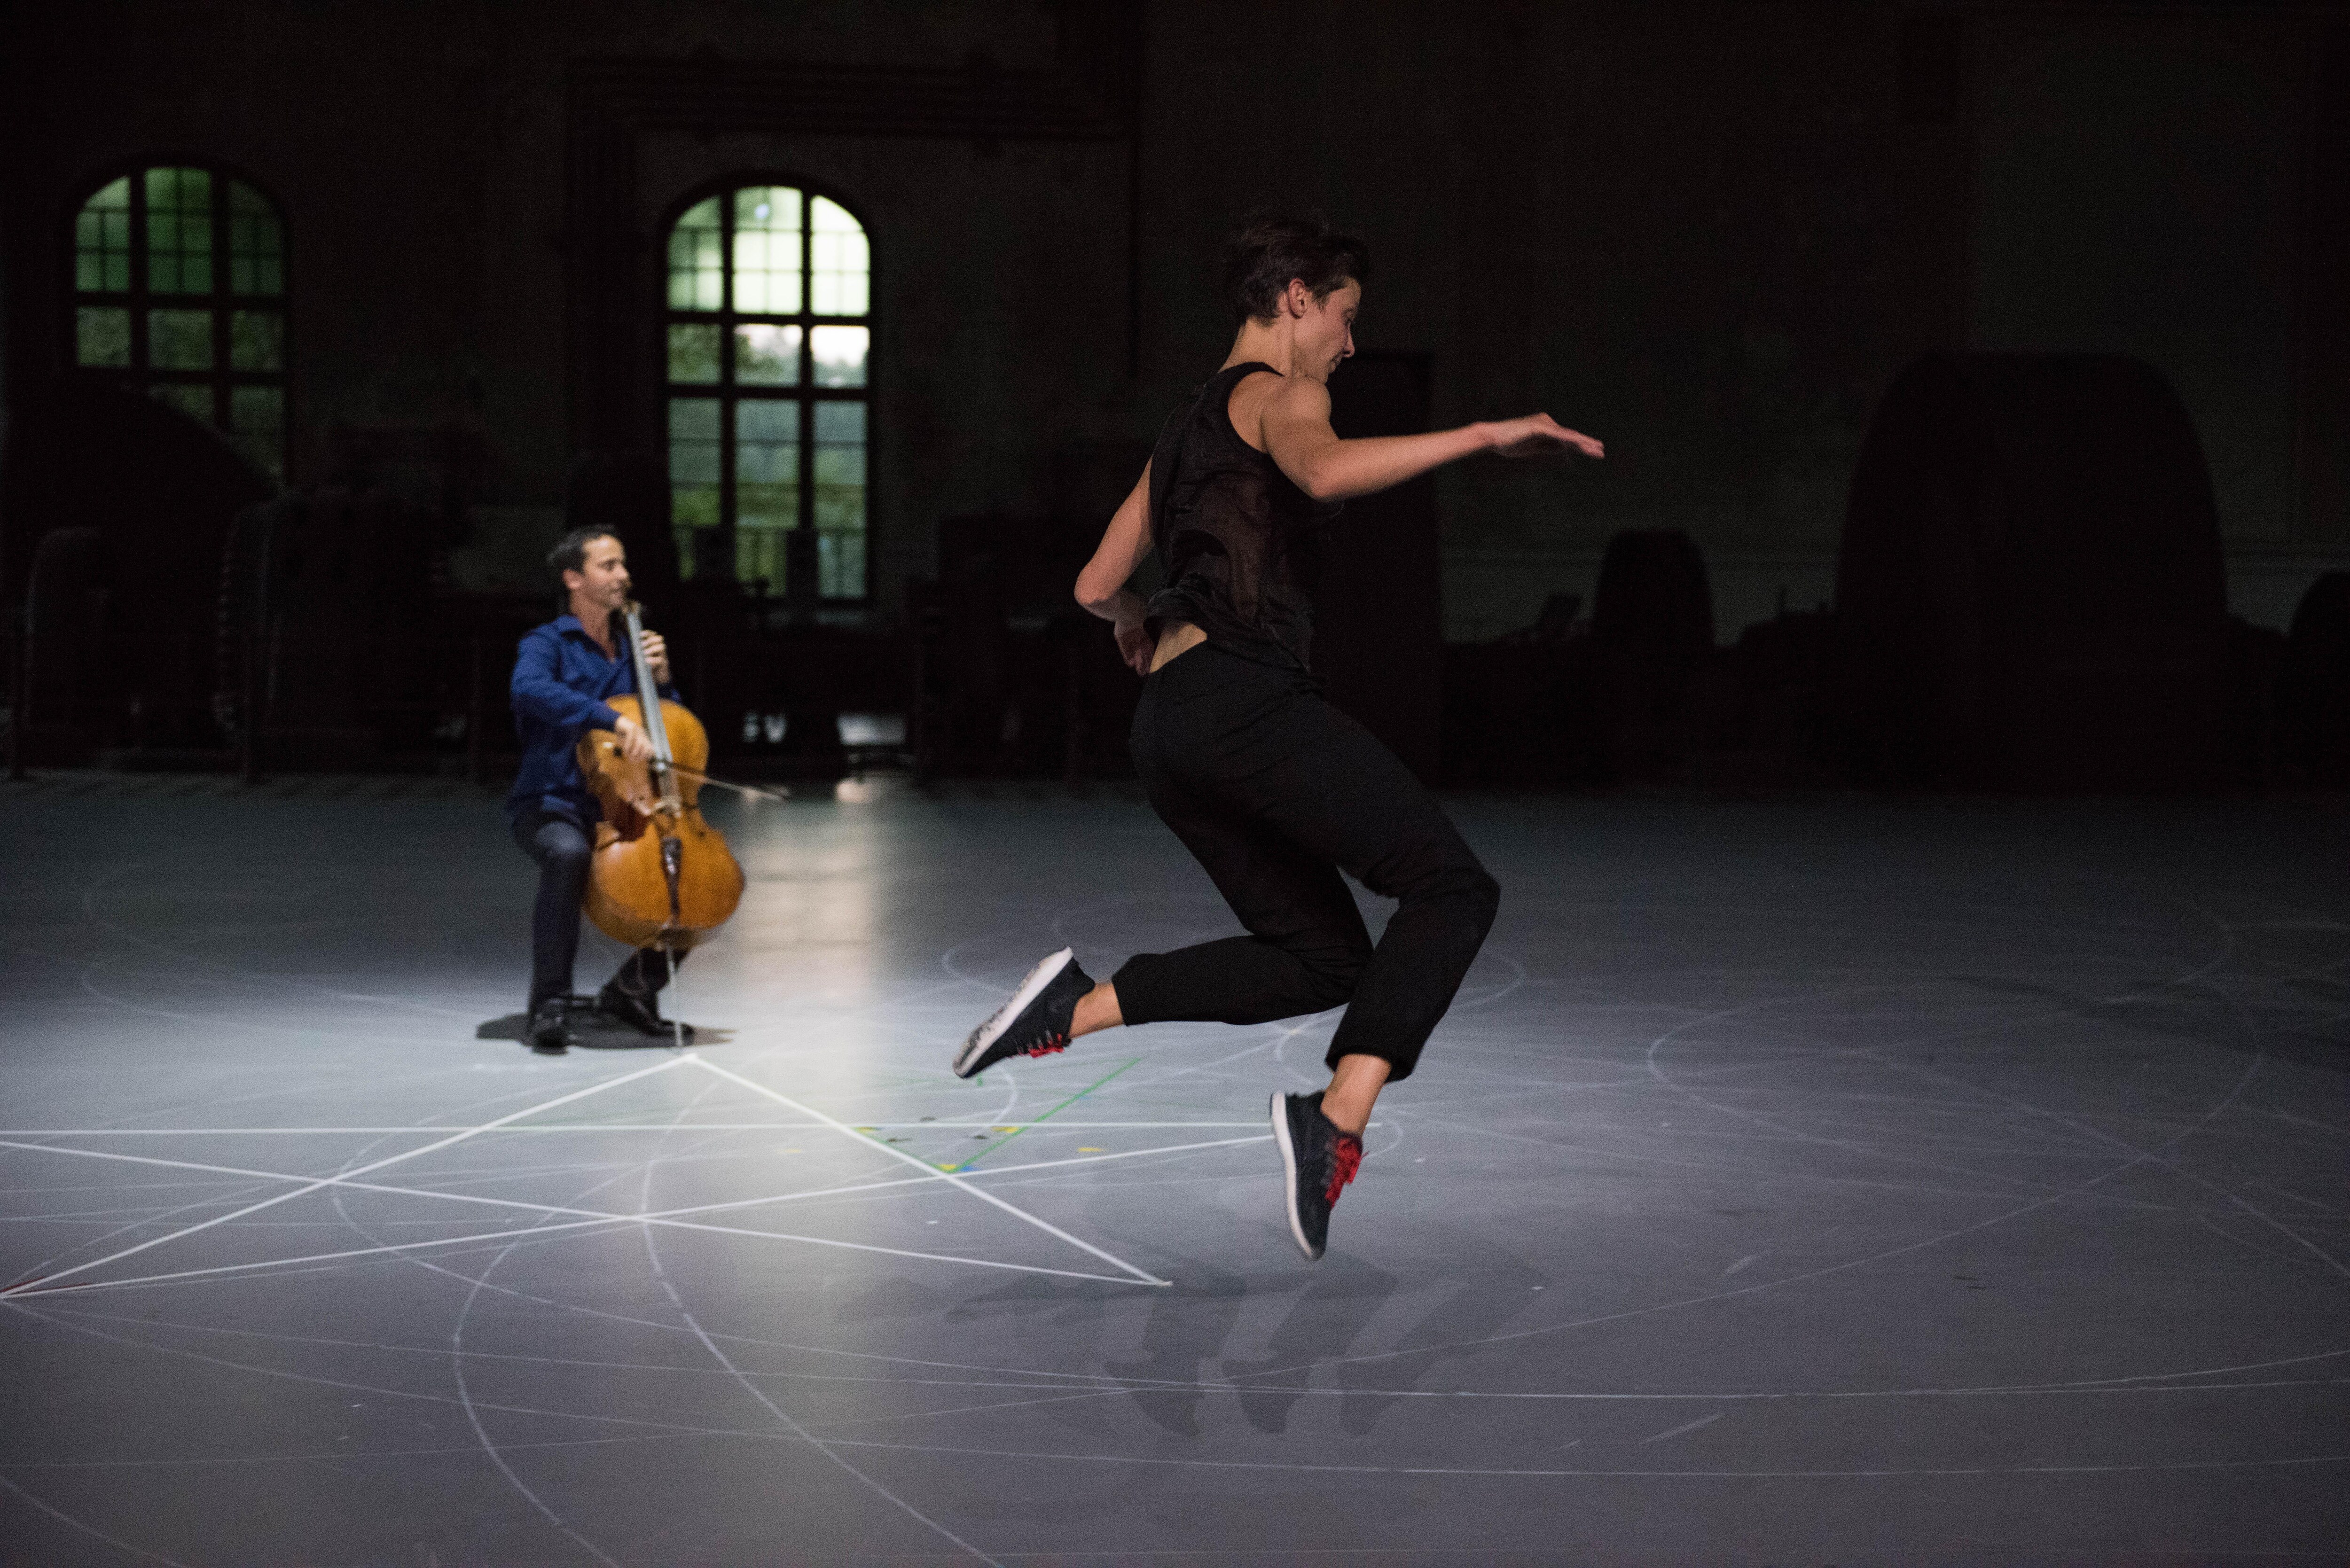 A dancer jumping in the air in front of cellist Jean-Guihen Queyras